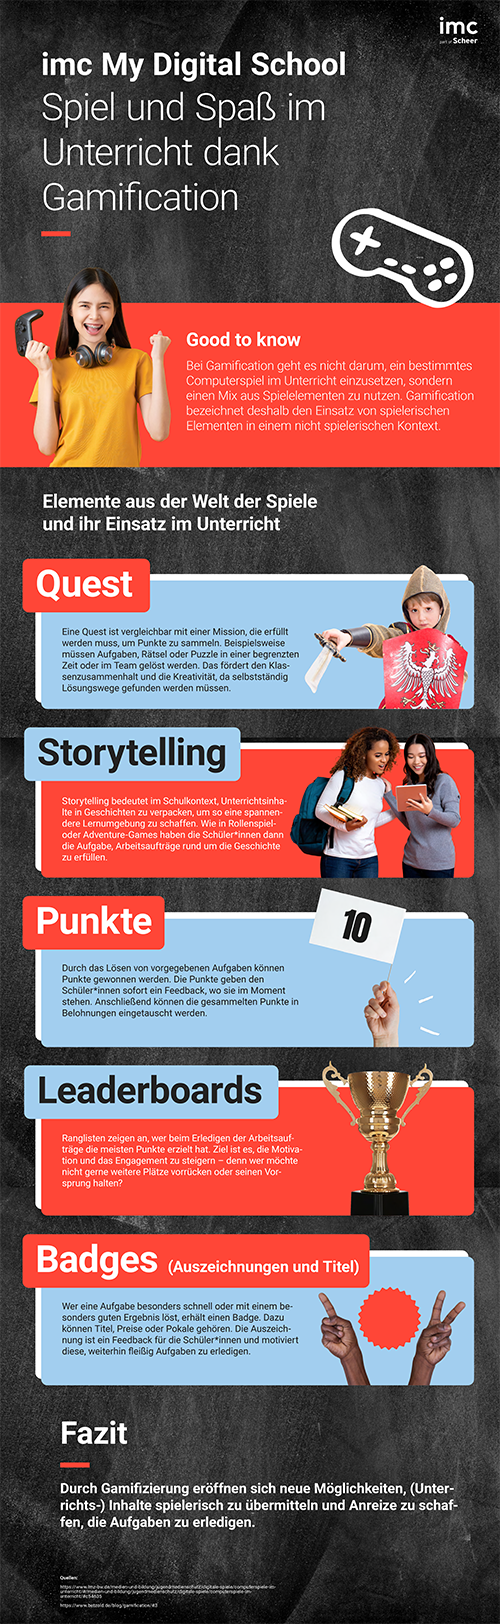 Infographic Gamification